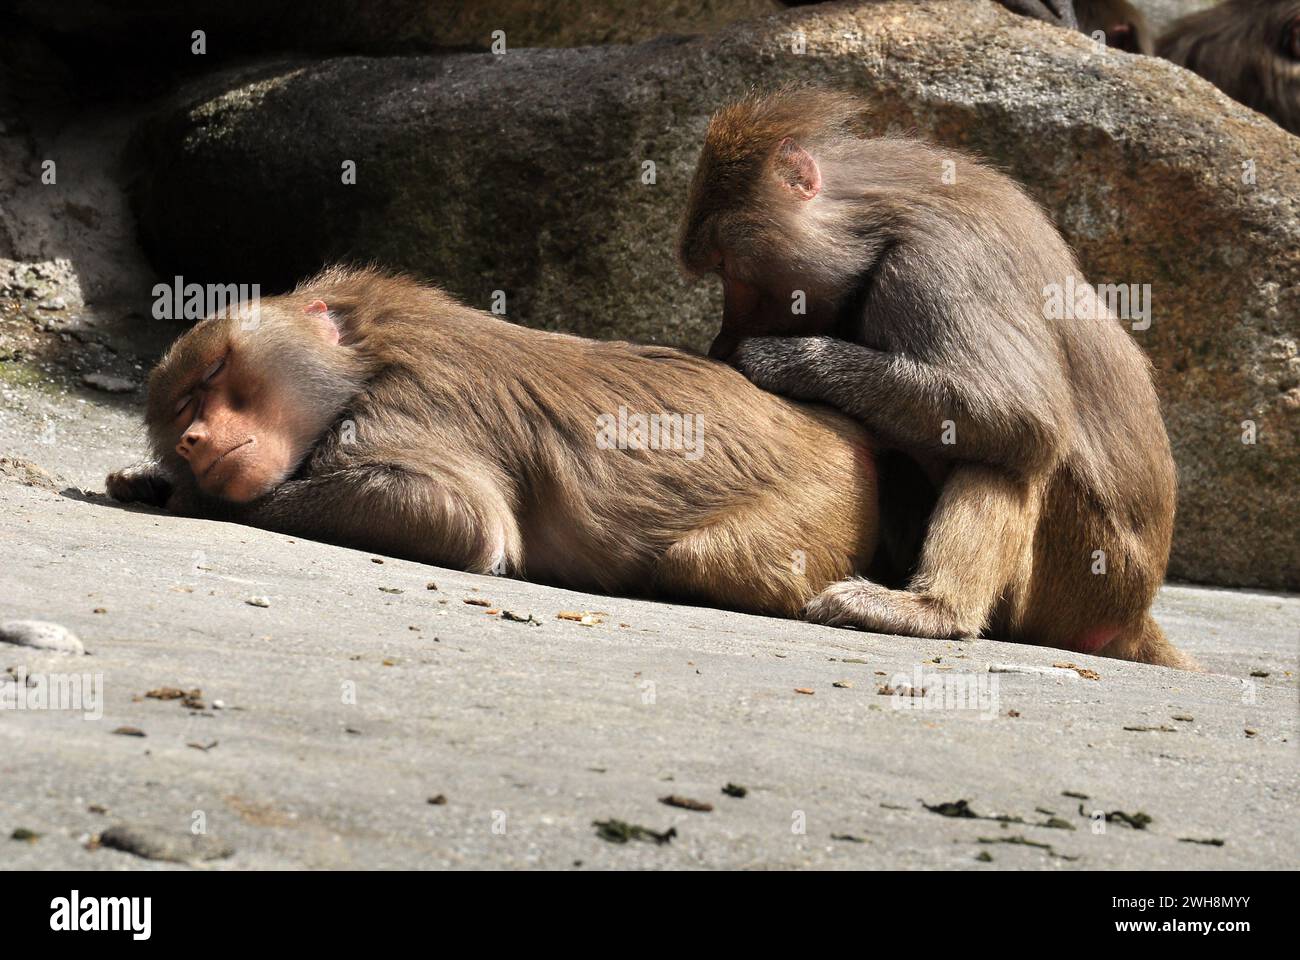 Two monkeys in relax time. One monkey takes care of an other one. They enjoy their rest time on the rocks. Animal behavior similar to human behavior Stock Photo